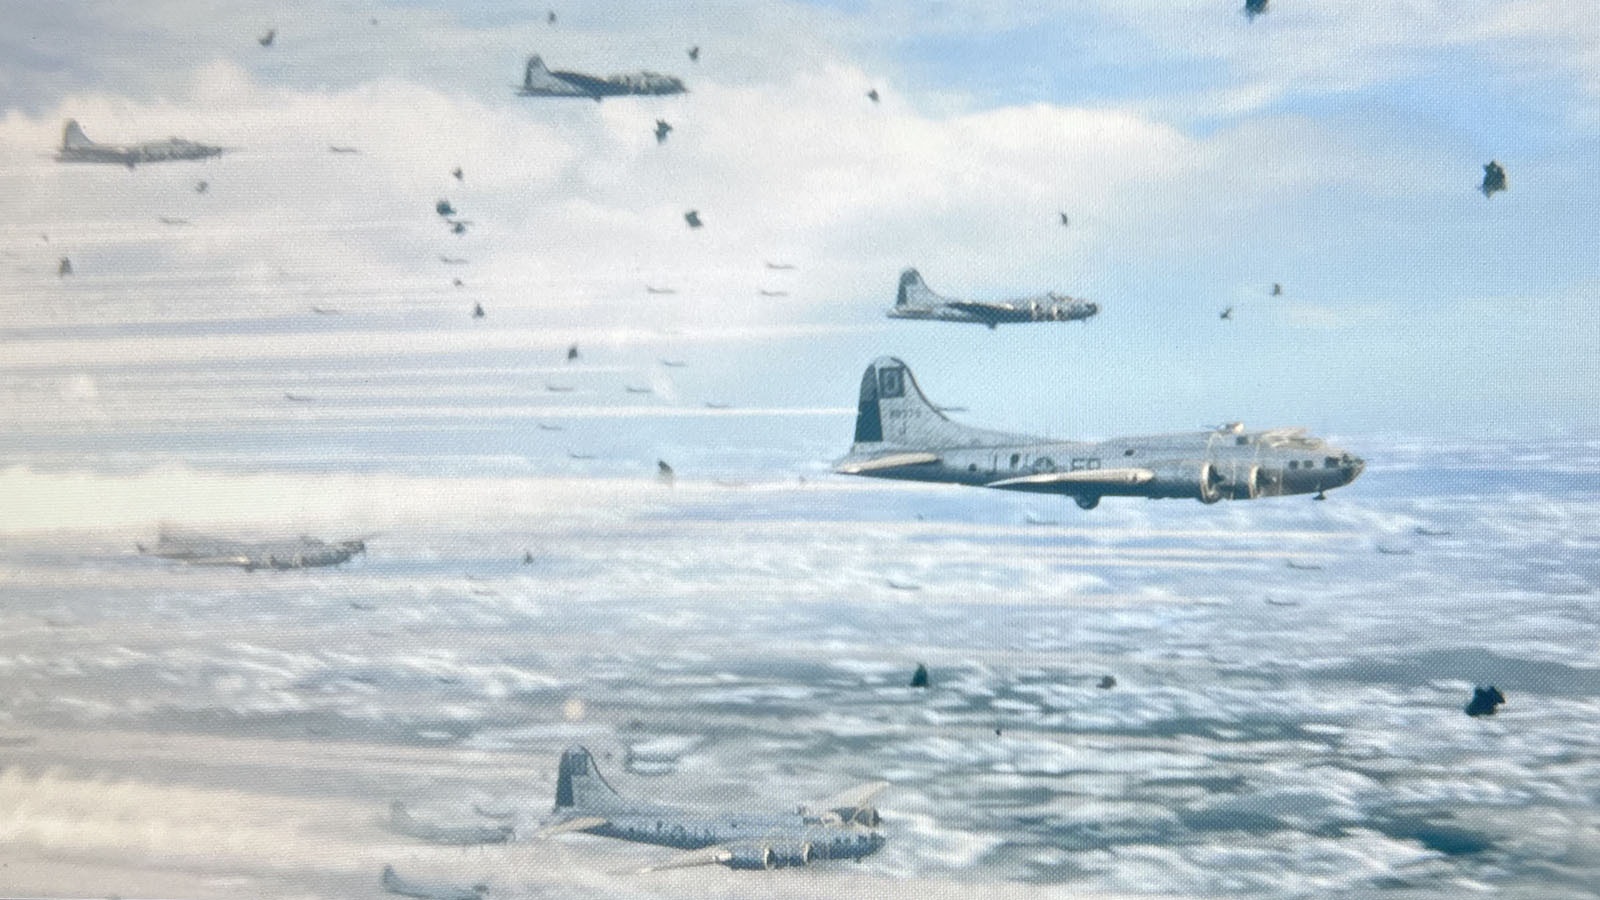 An Allied bomber squadron is attacked.